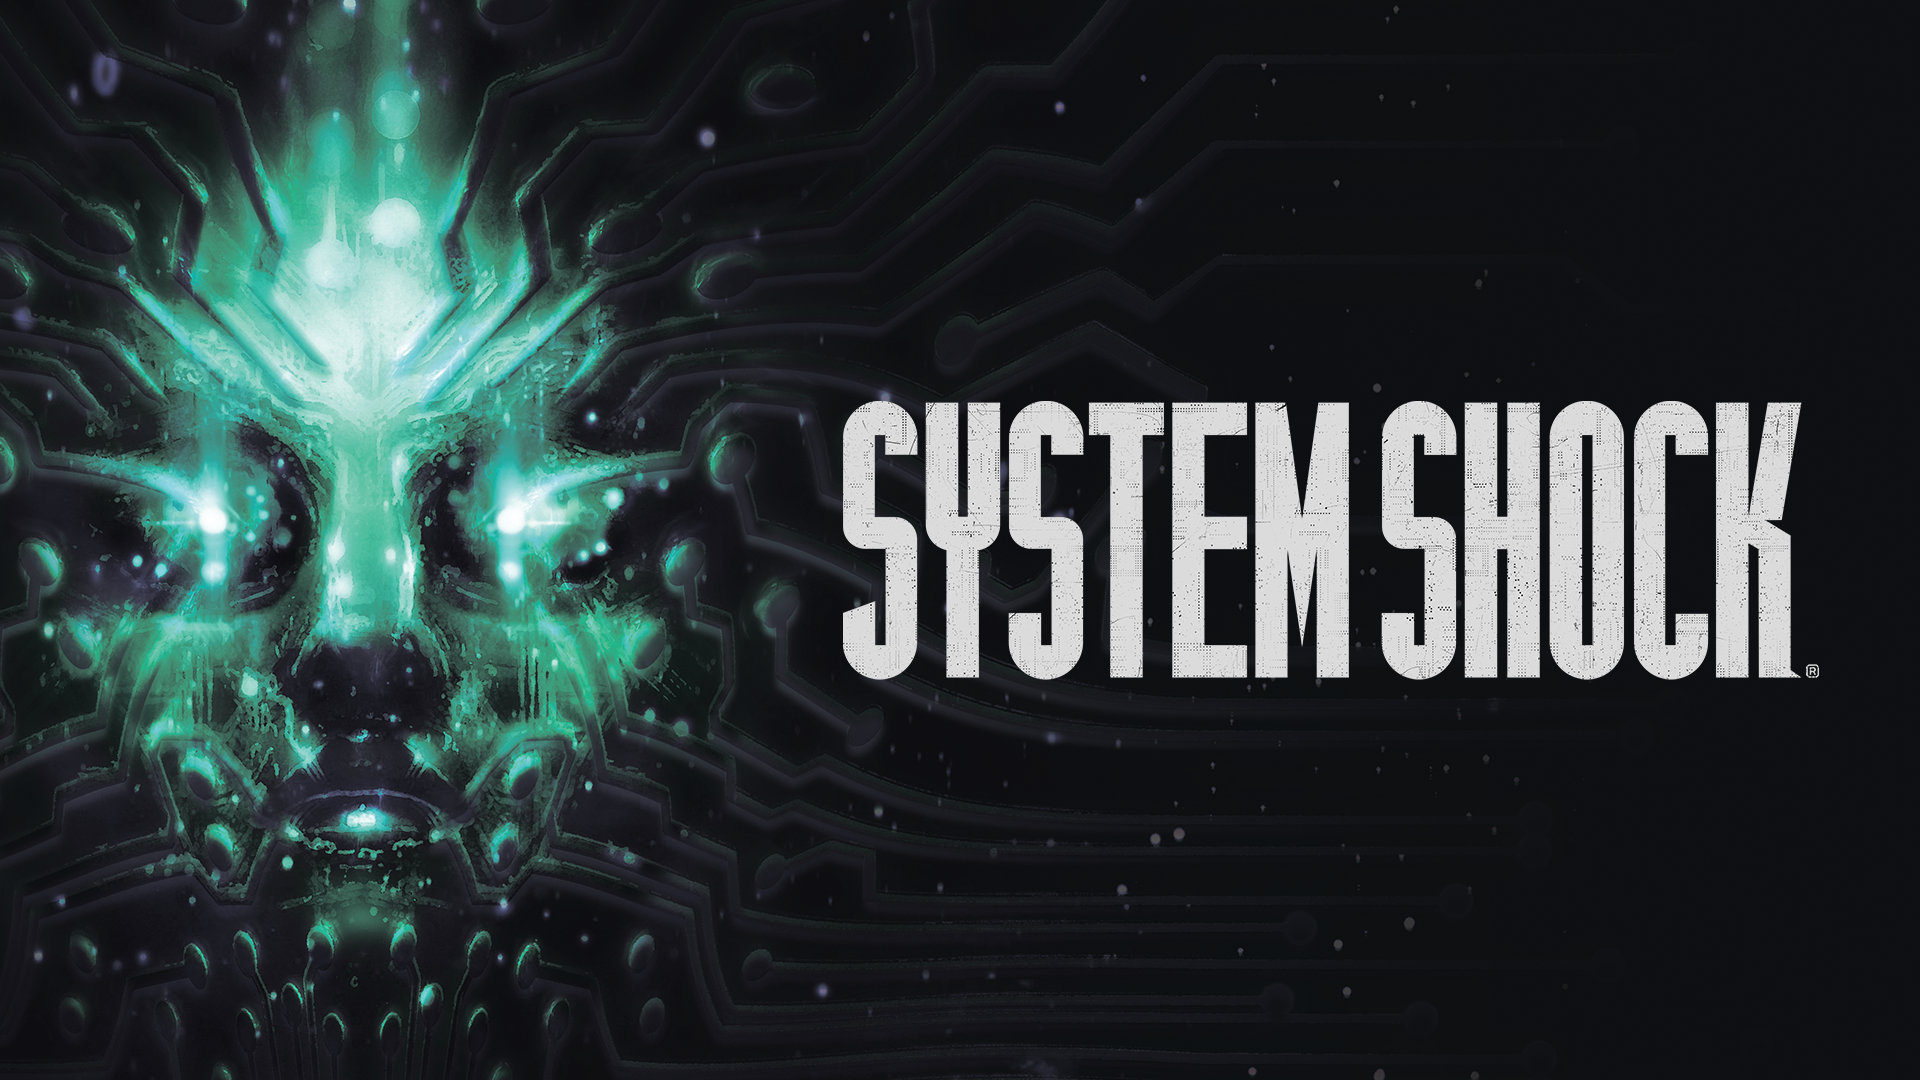 Key Art From System Shock Remake